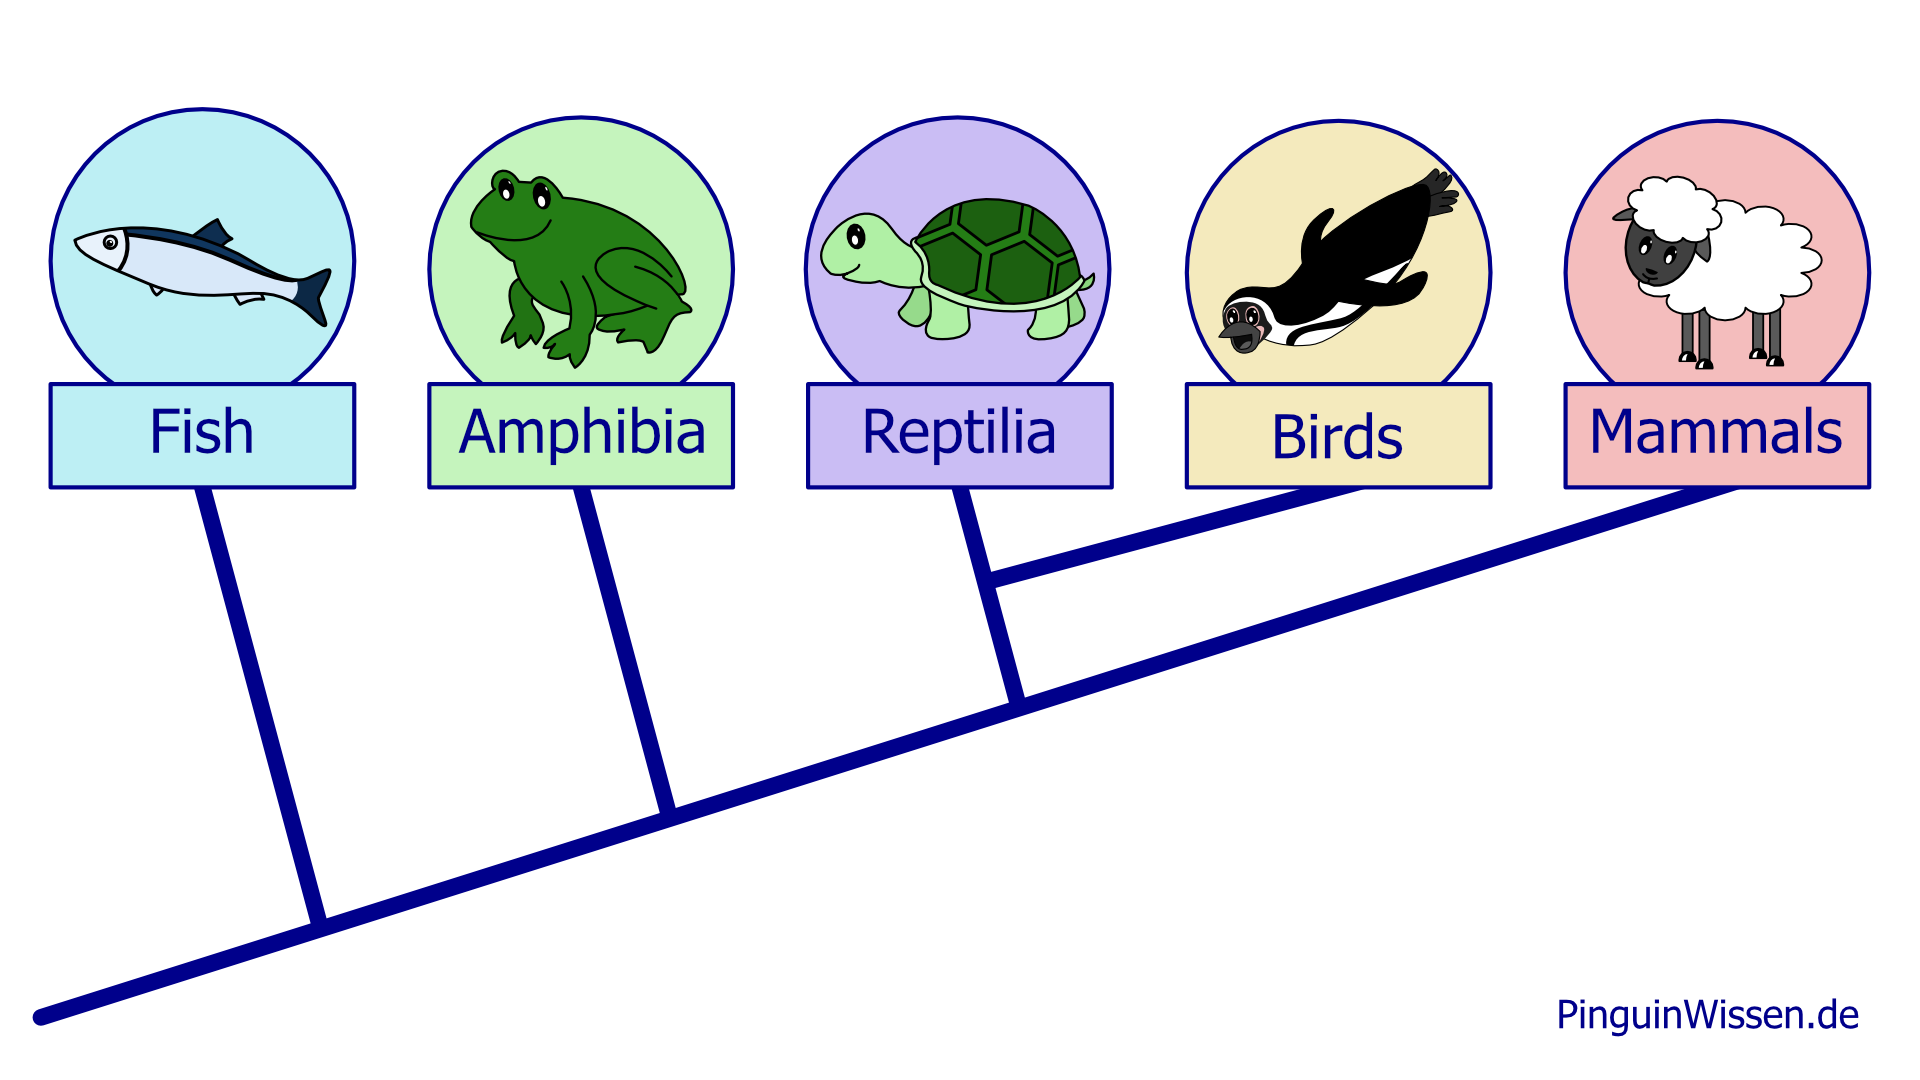 Pedigree graphic which is described in the text below.